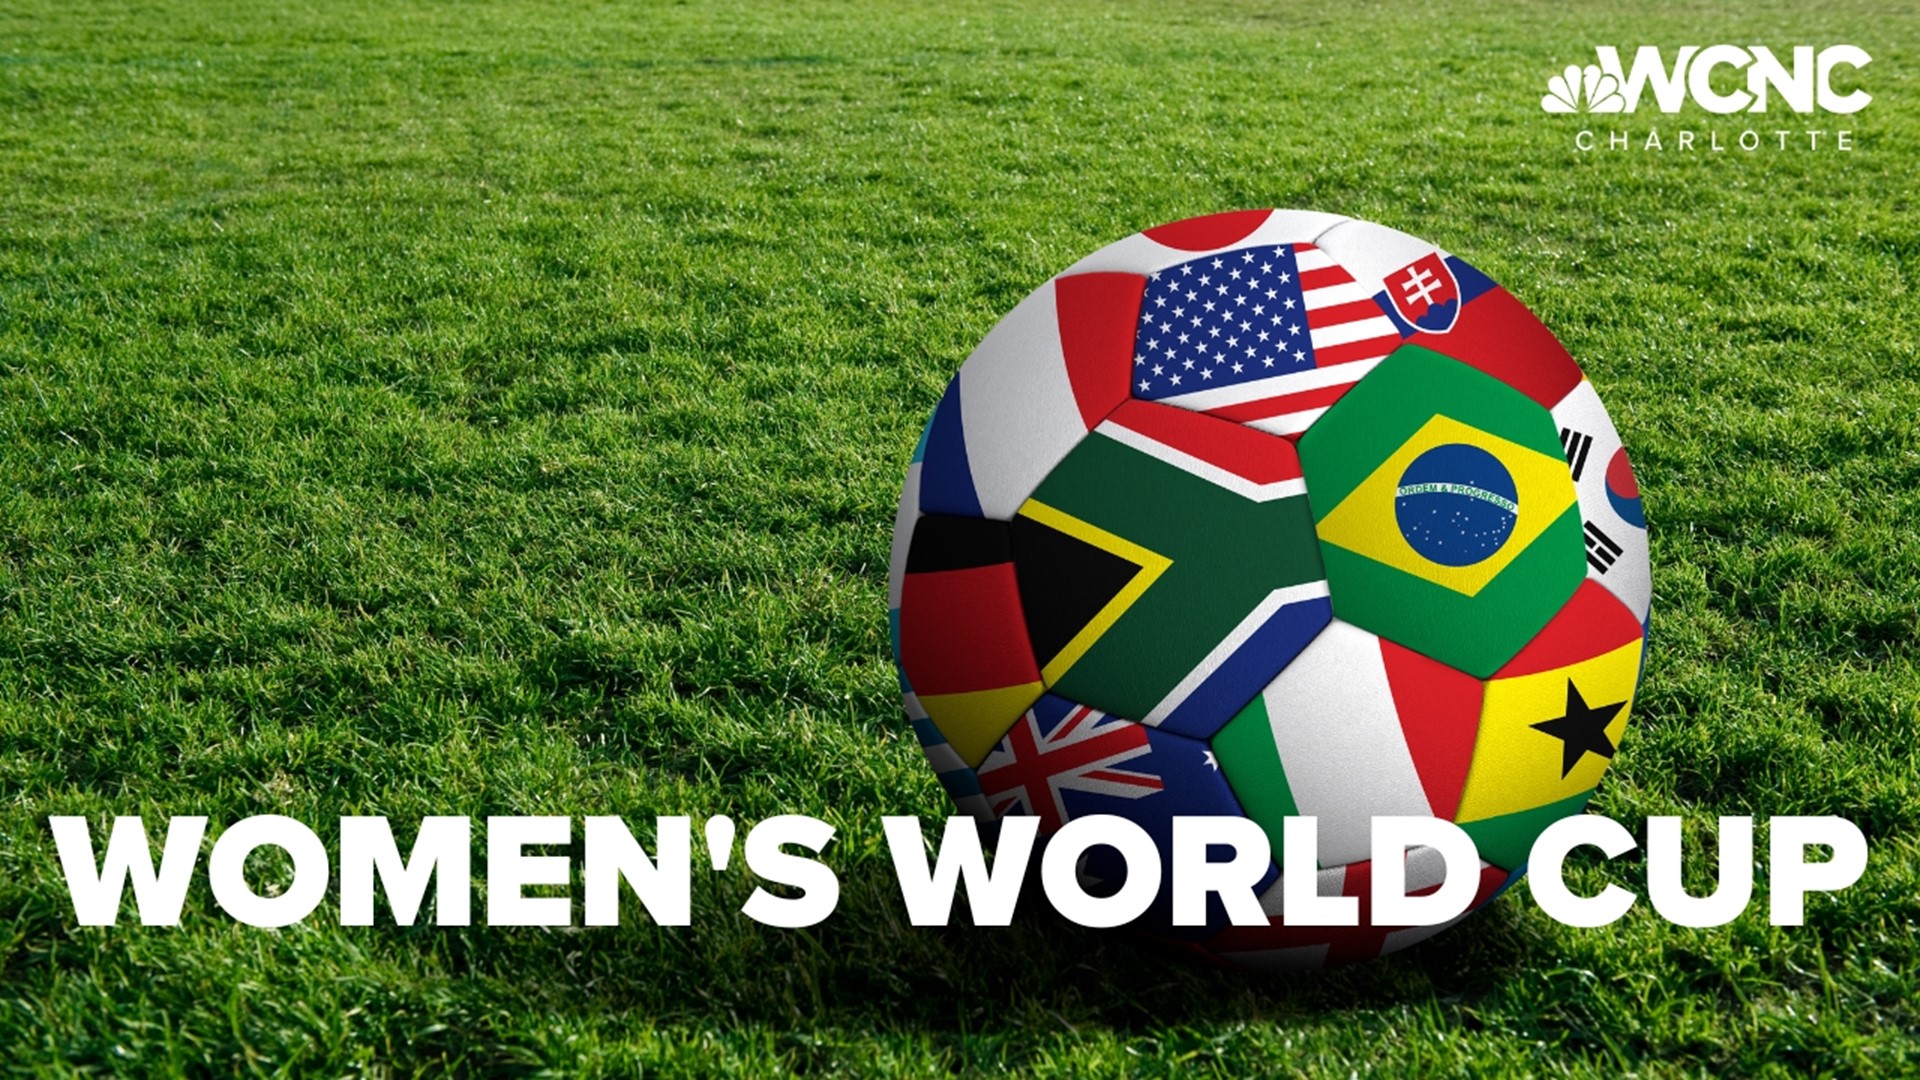 Womens world cup kicks off today! wcnc